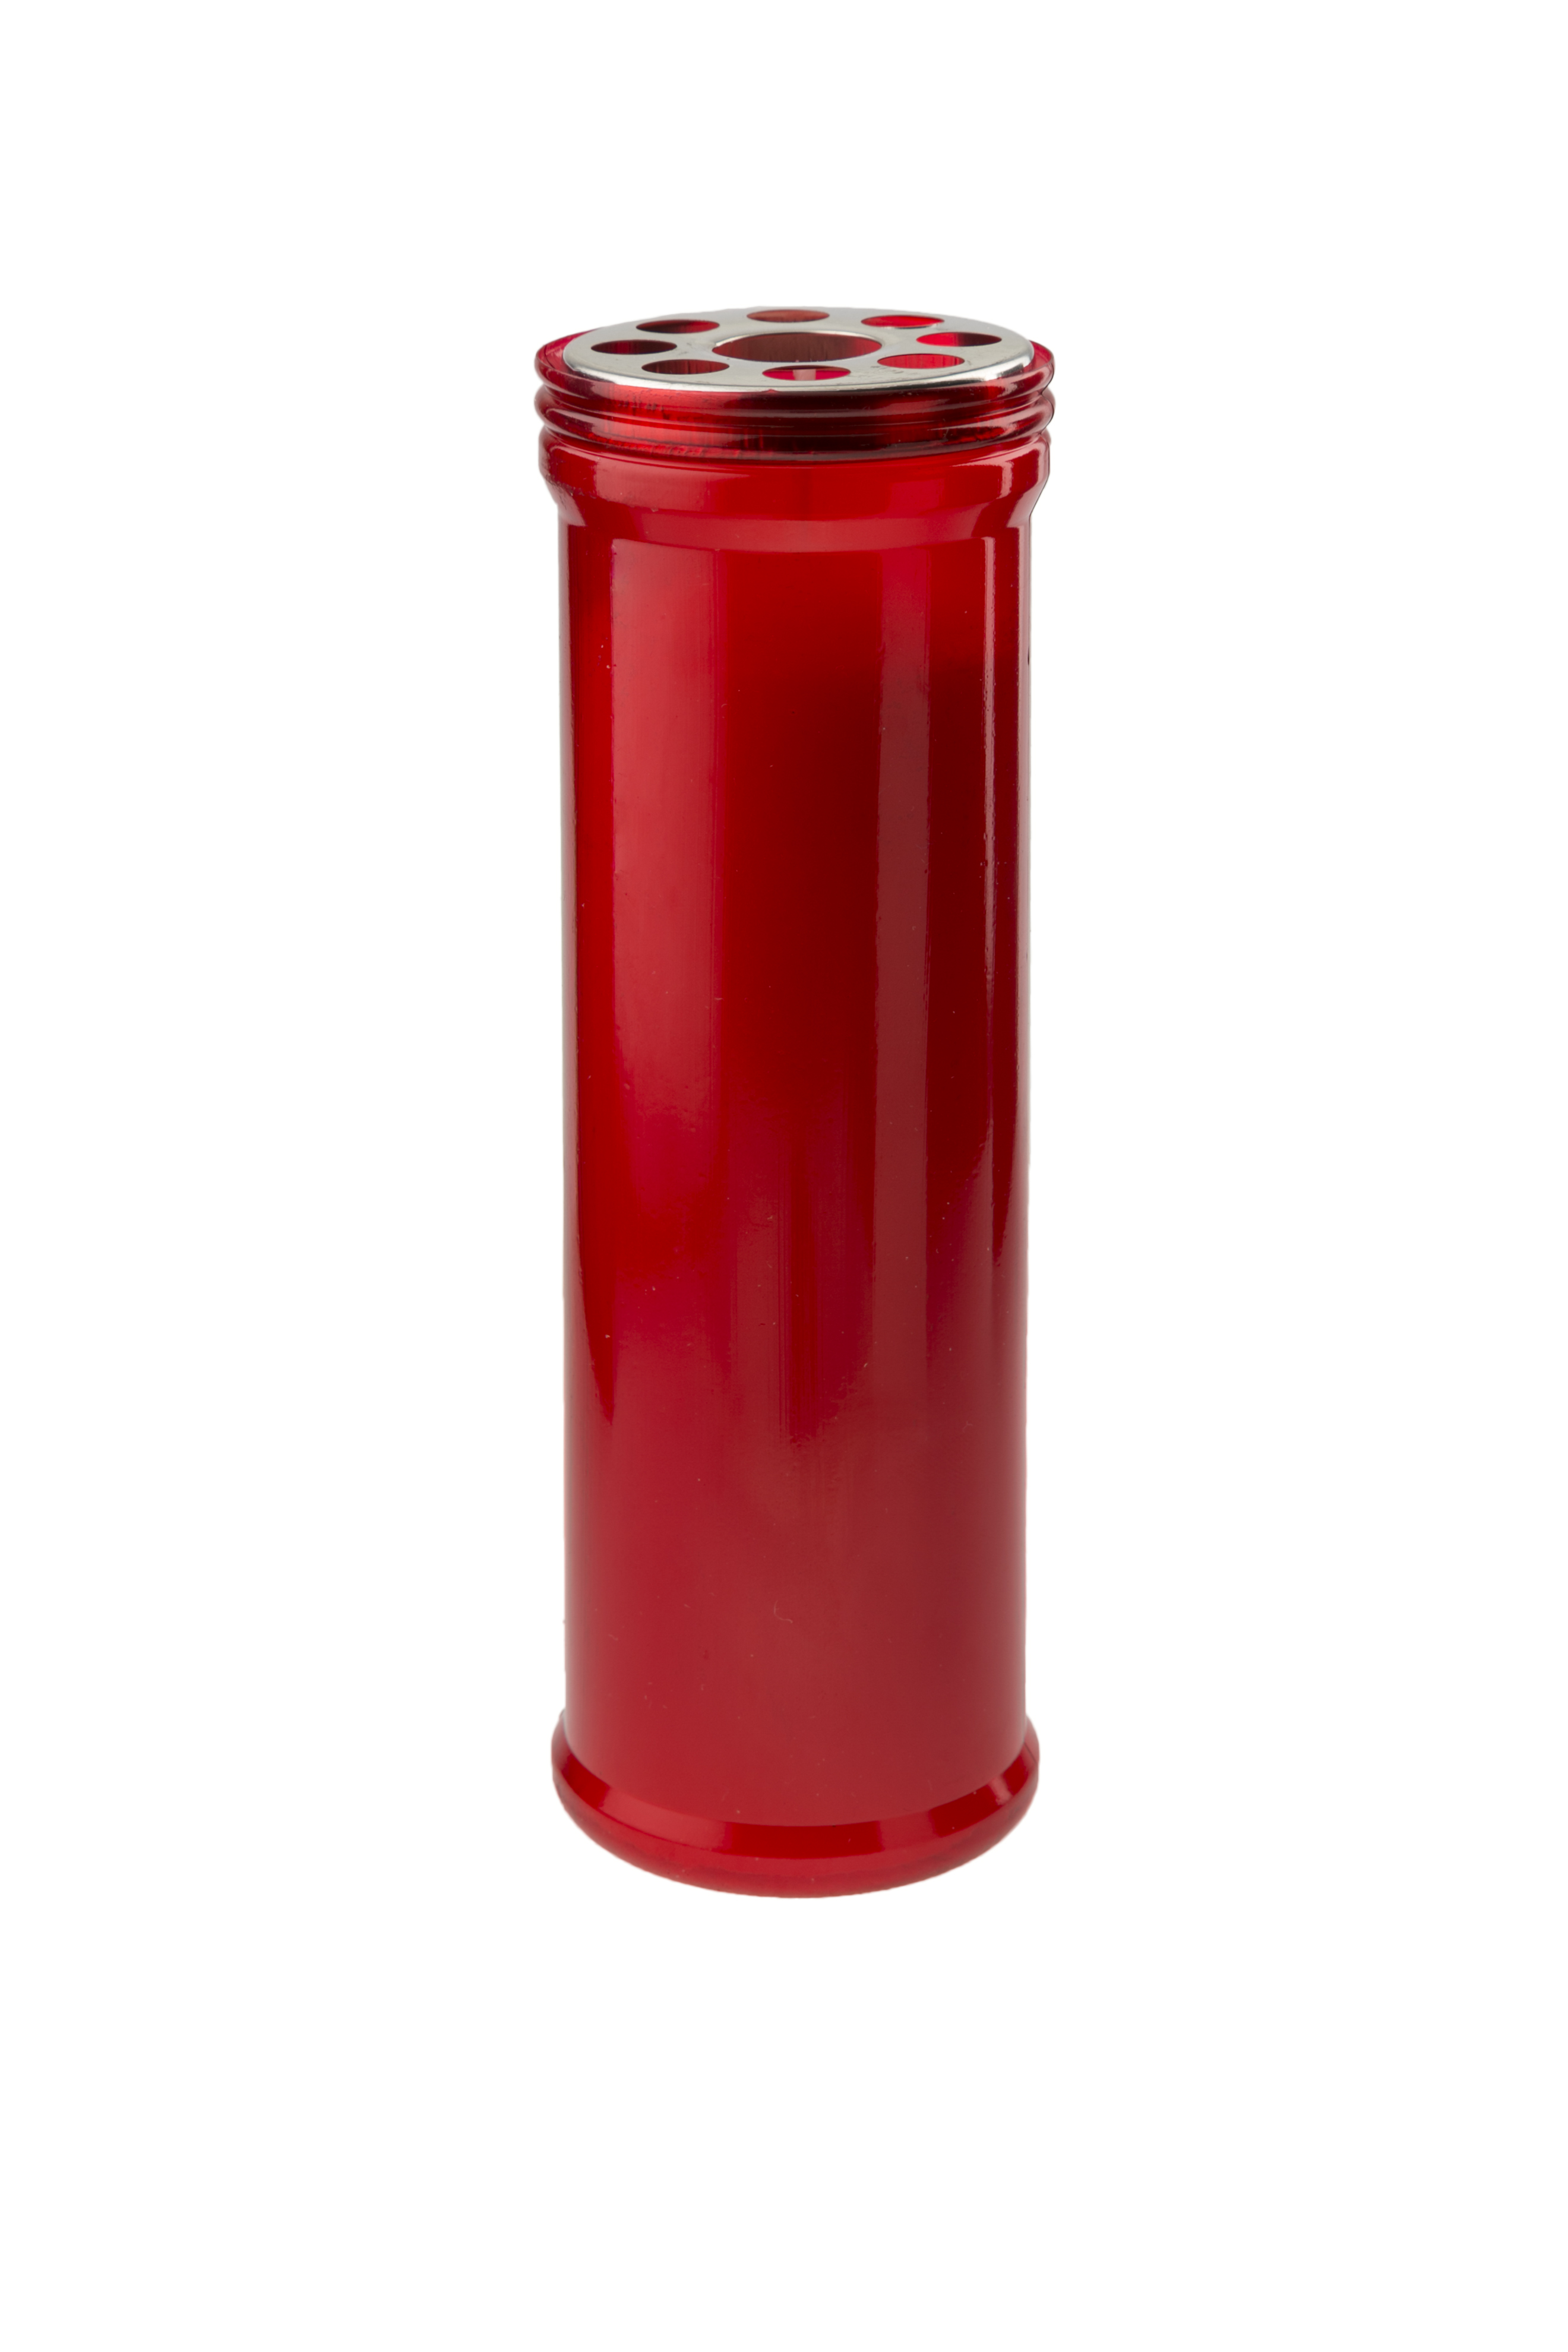 5 DAY RED CANDLE WITH LID. VM010539